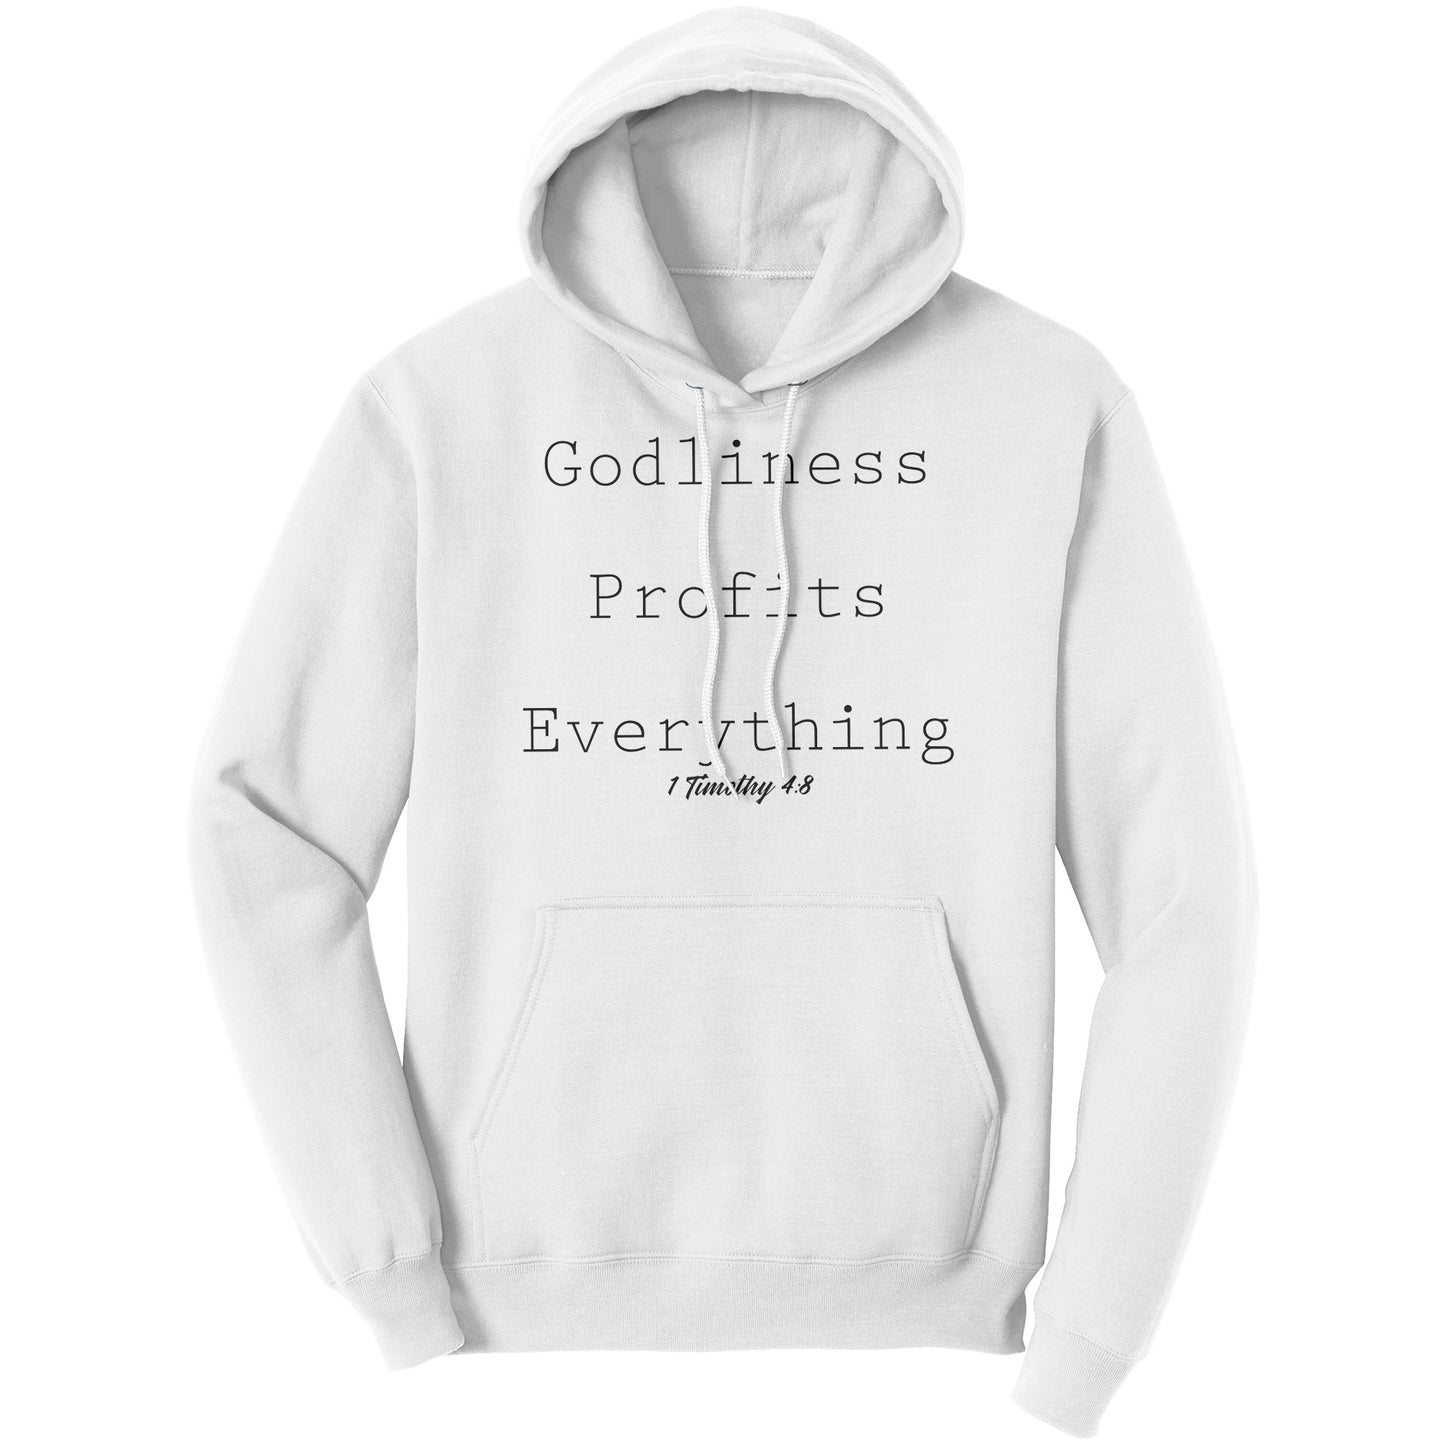 Godliness Profits Everything 1 Timothy 4:8 Hoodie Part 1